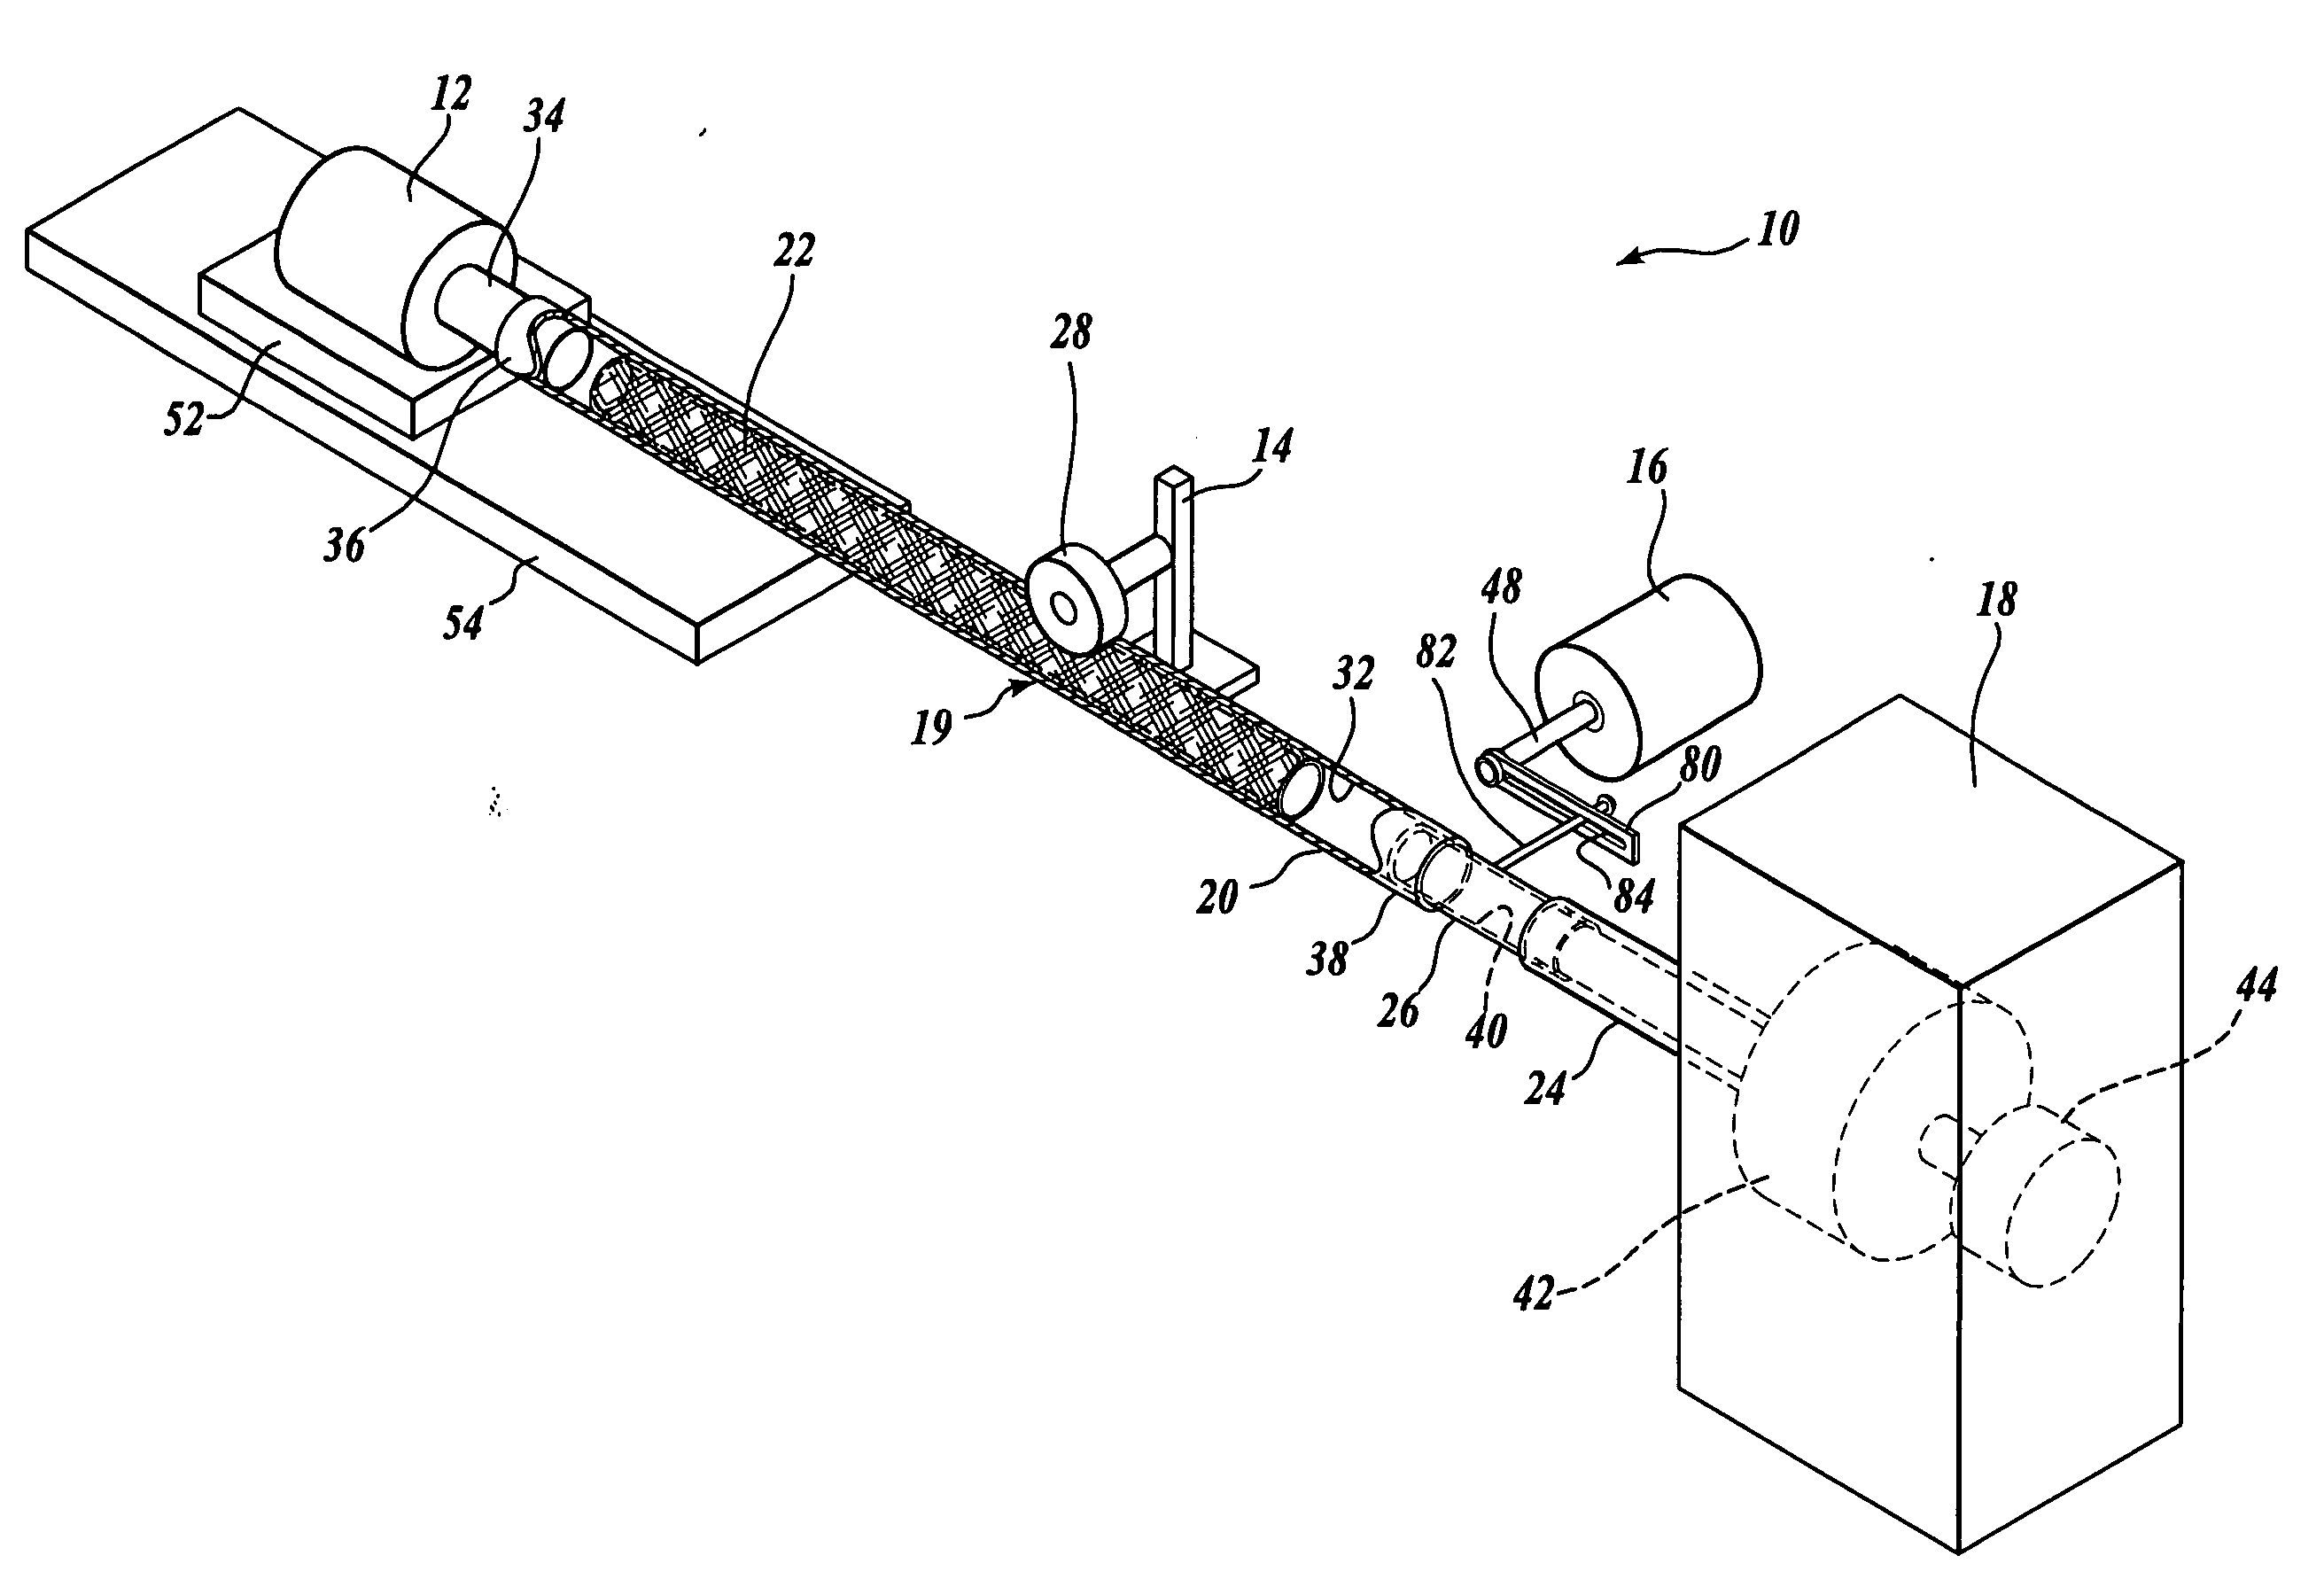 Method and apparatus for vascular durability and fatigue testing